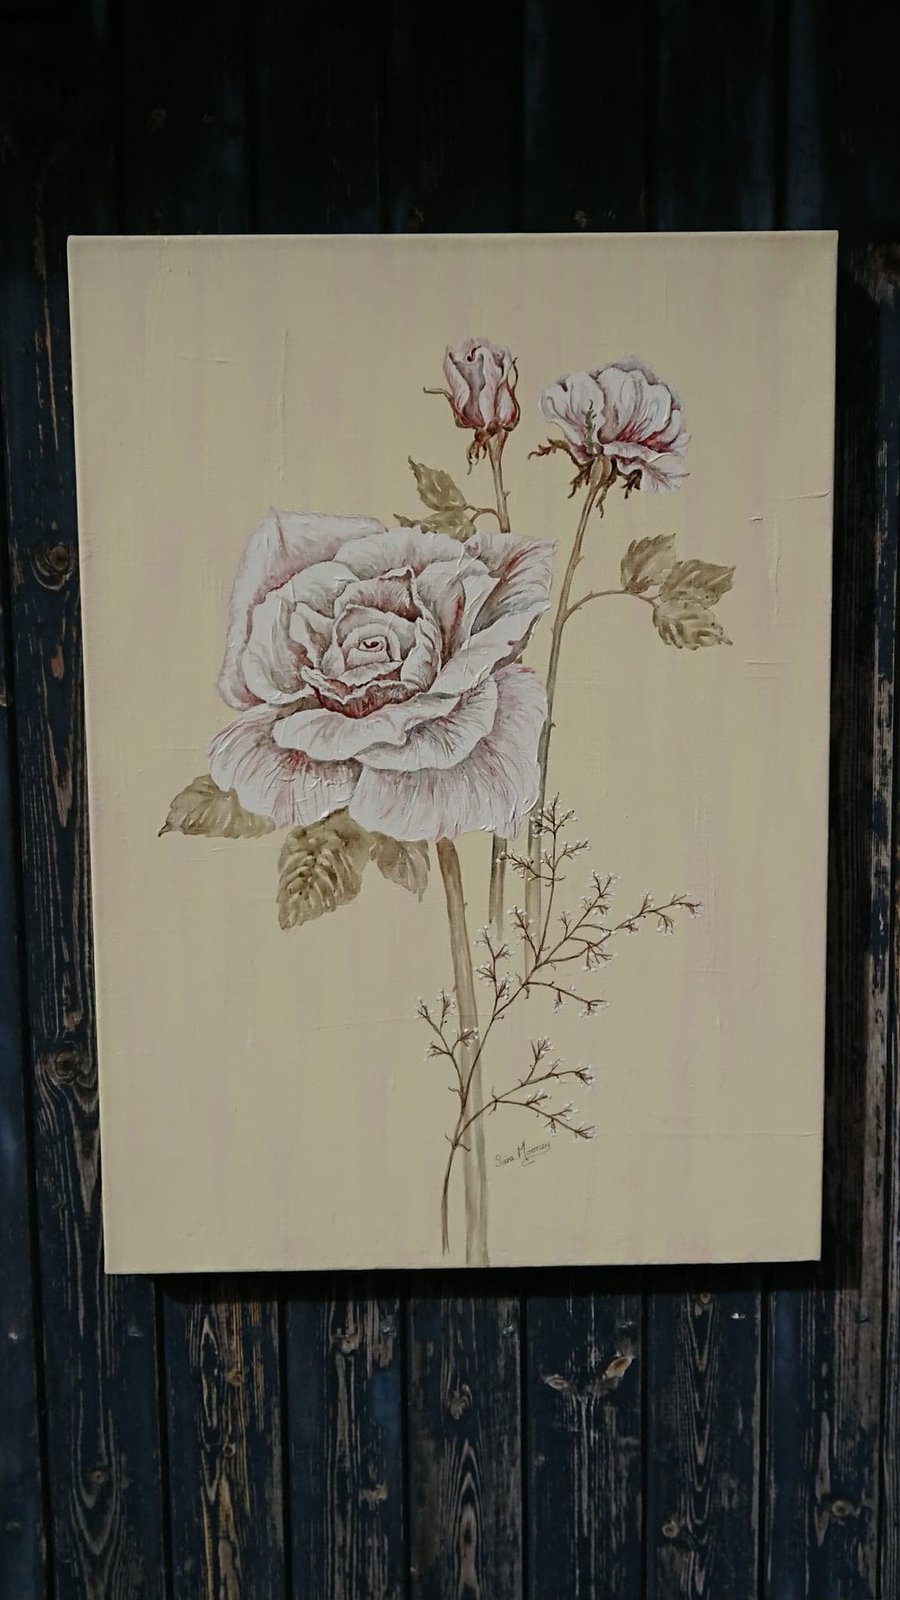 Pink and white painting of roses on canvas with pink and cream background